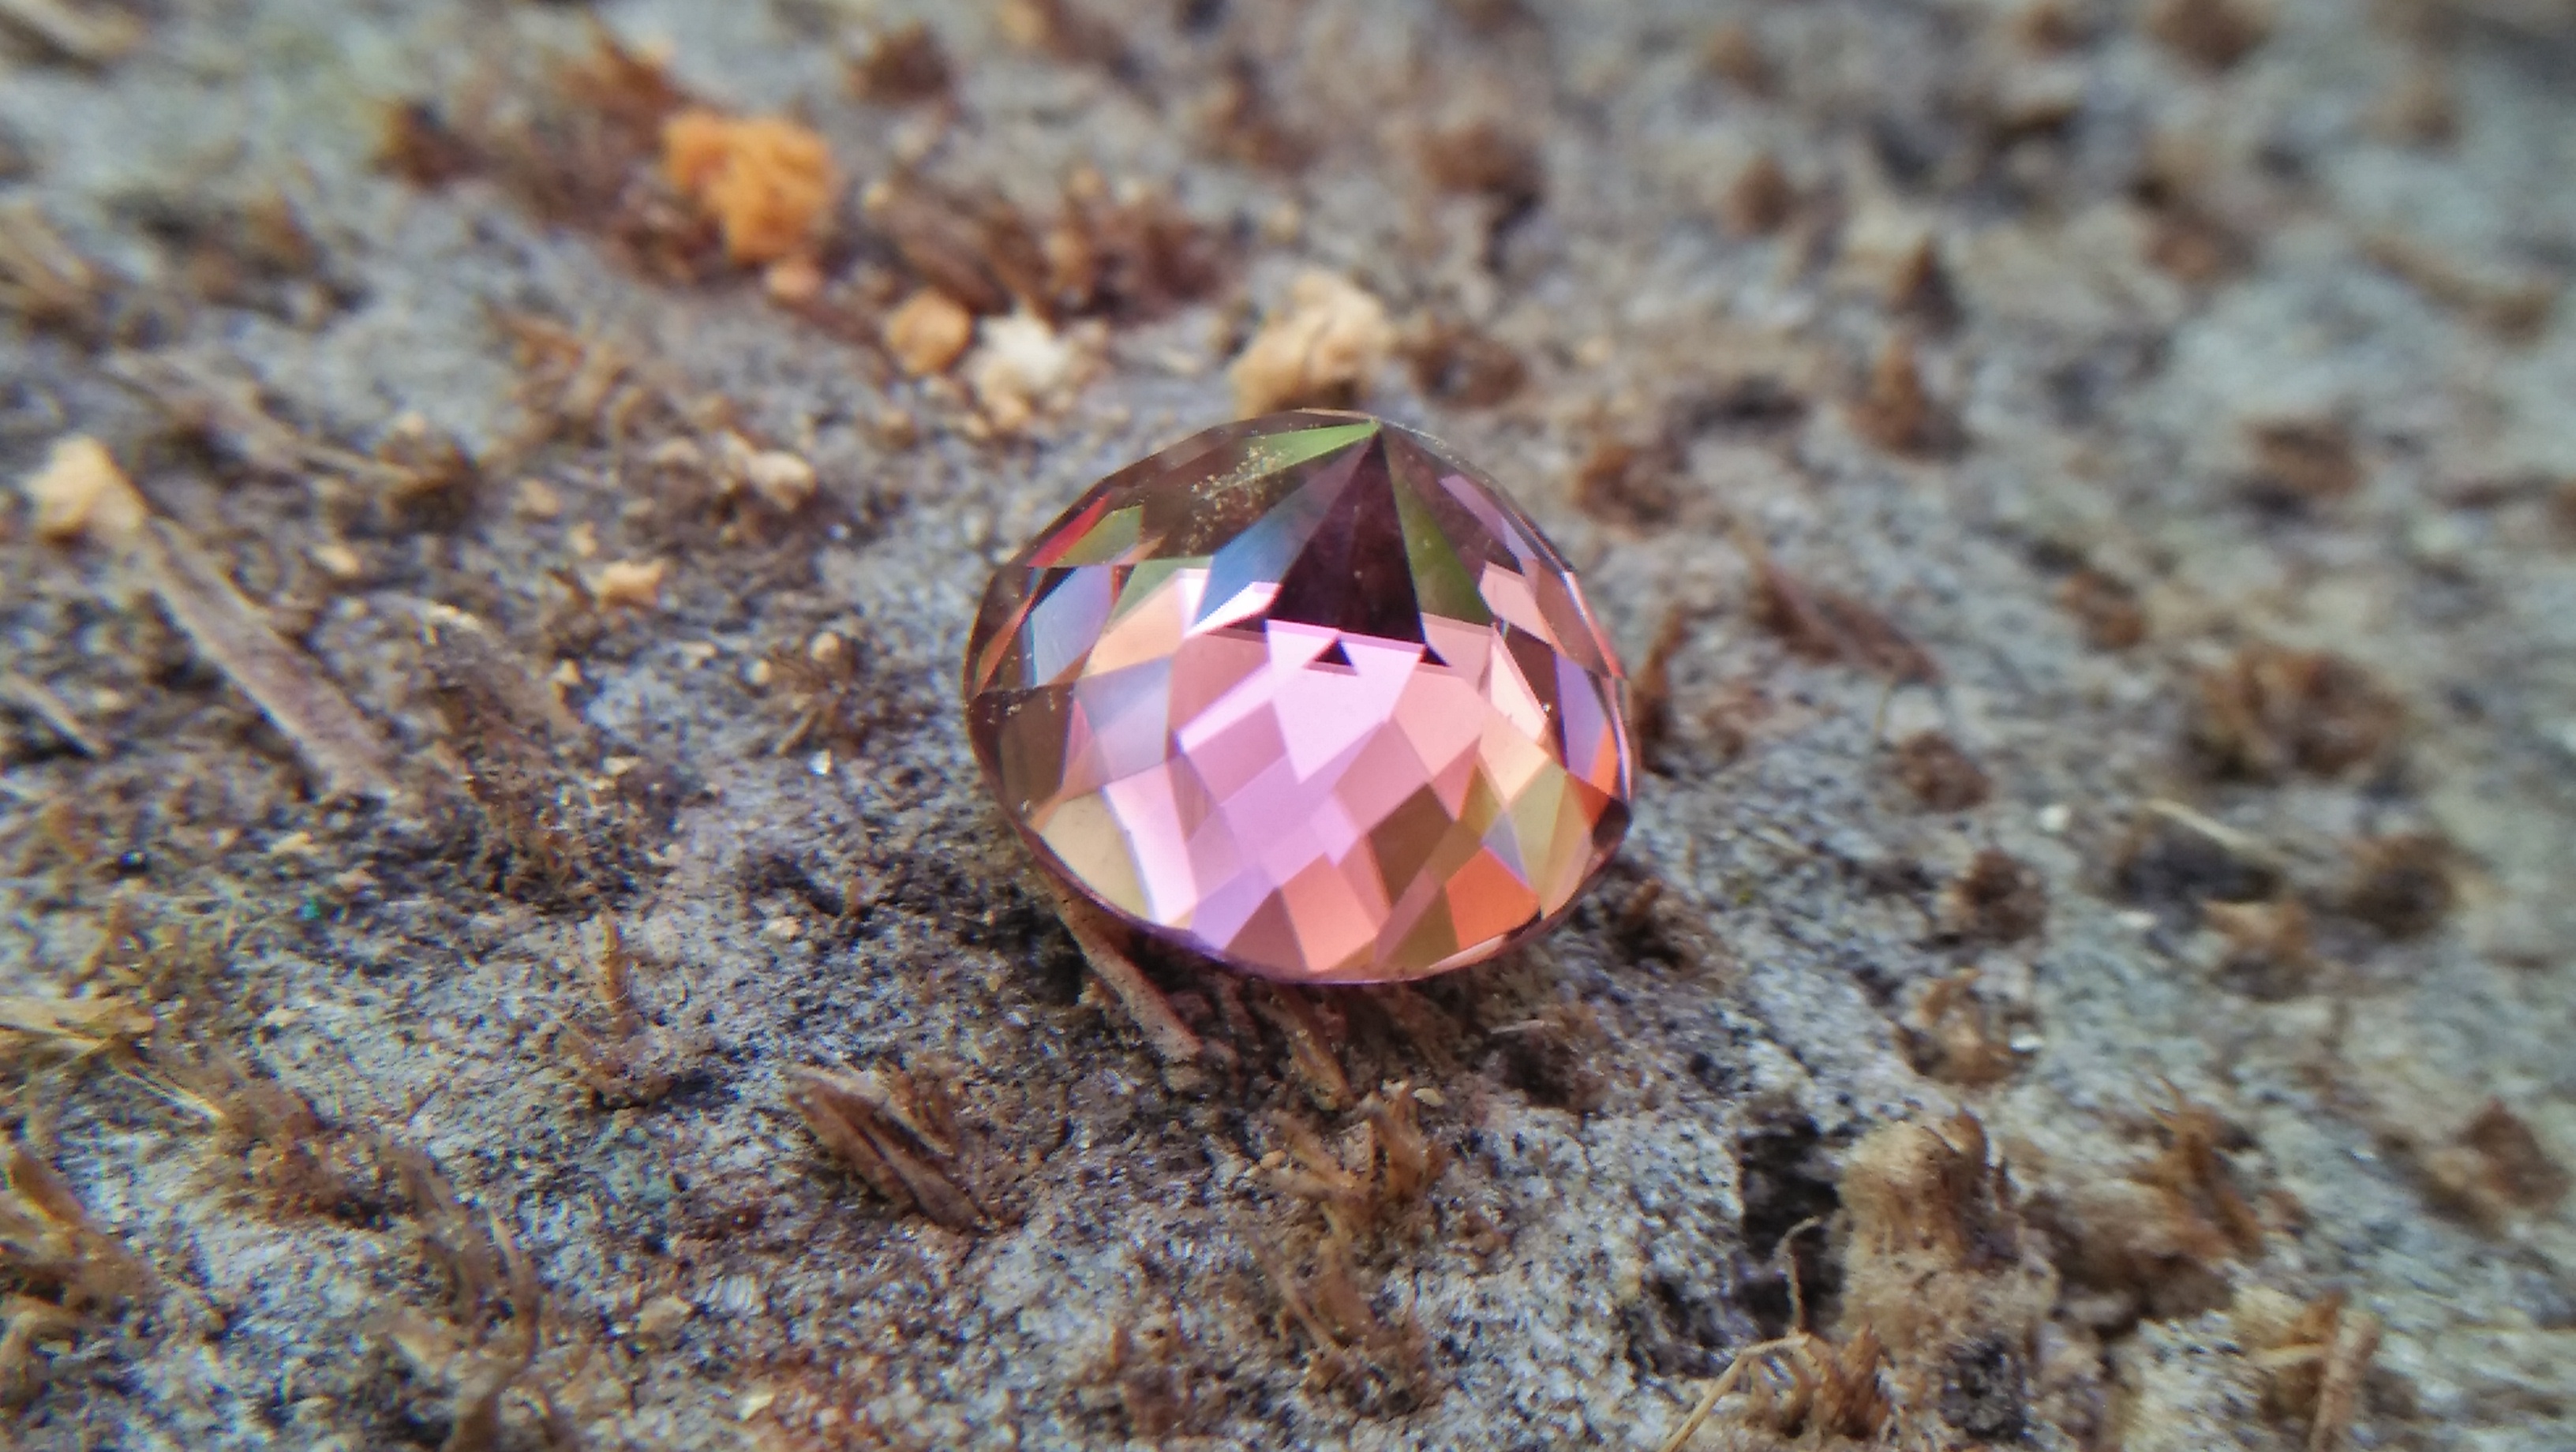 Natural Colour Change Zircon Very fine quality luster Weight: 4.45Cts Dimension: 8.7mm x 6.2mm Shape : Round Clarity : Clean Treatment : None/ Natural/ Unheated Colour: changing Colours Brown, Peach, pinkish purple, Red